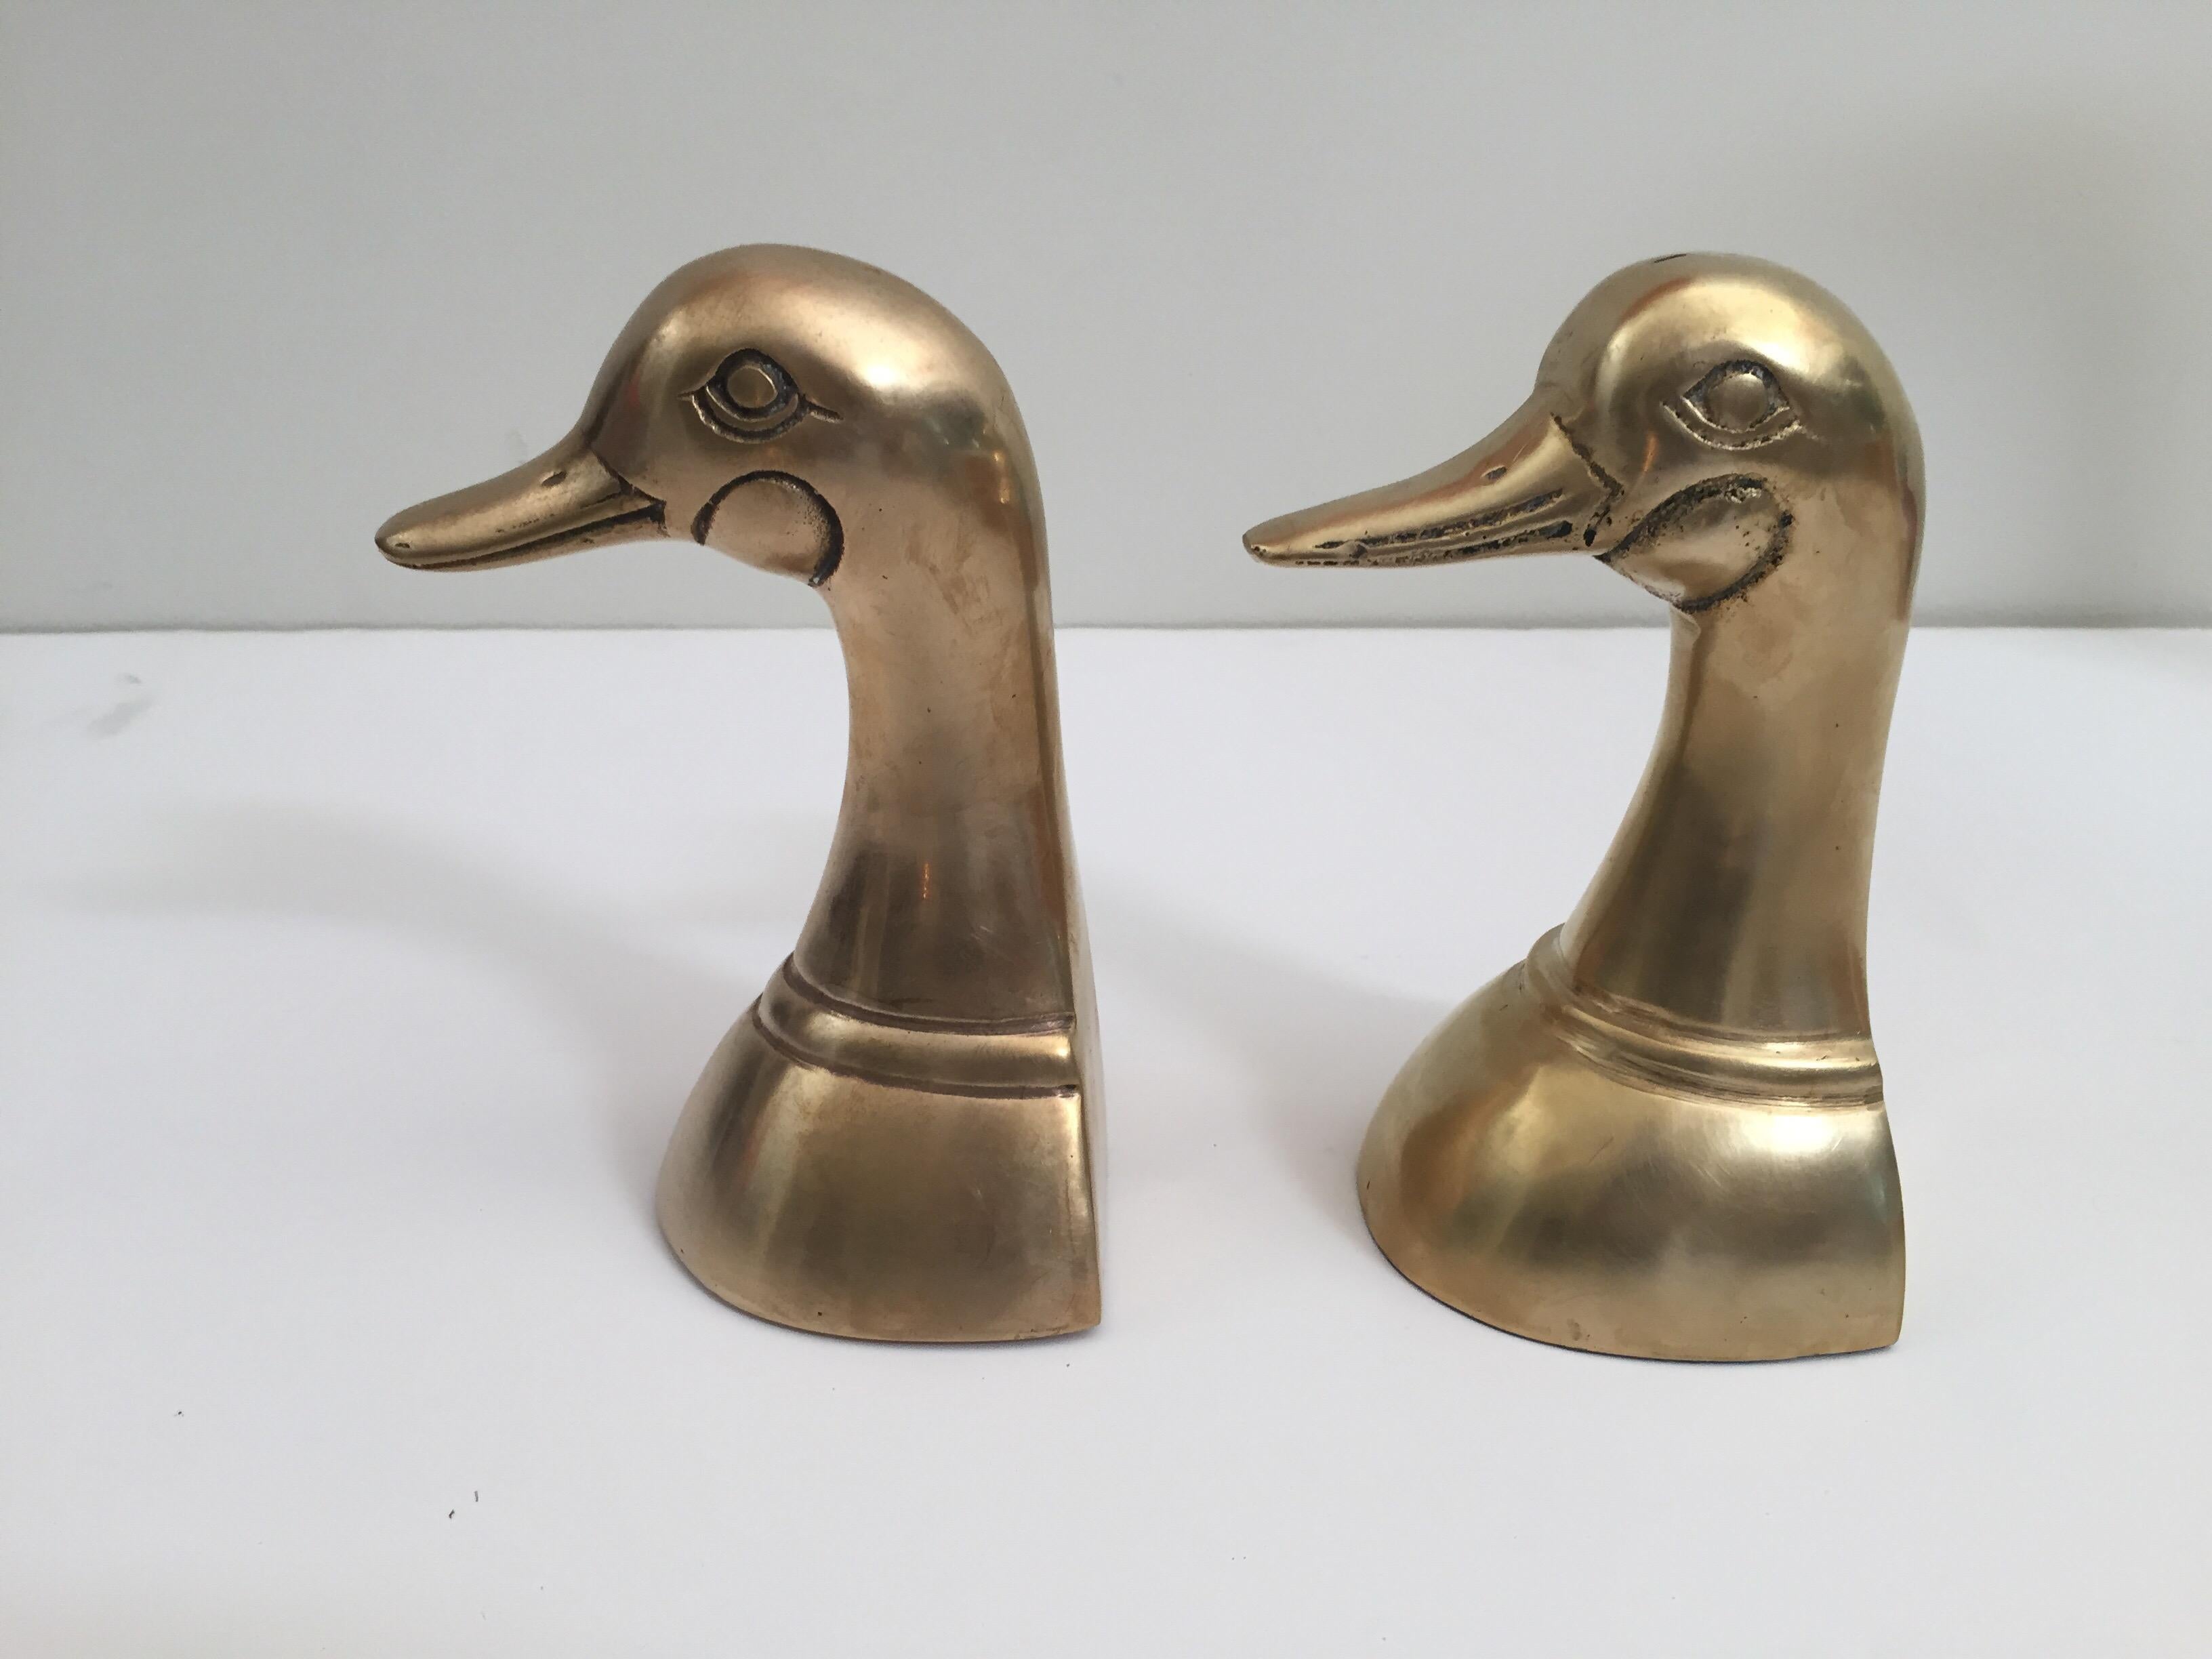 American Craftsman Pair of Vintage Polished Cast Brass Duck Bookends, circa 1950